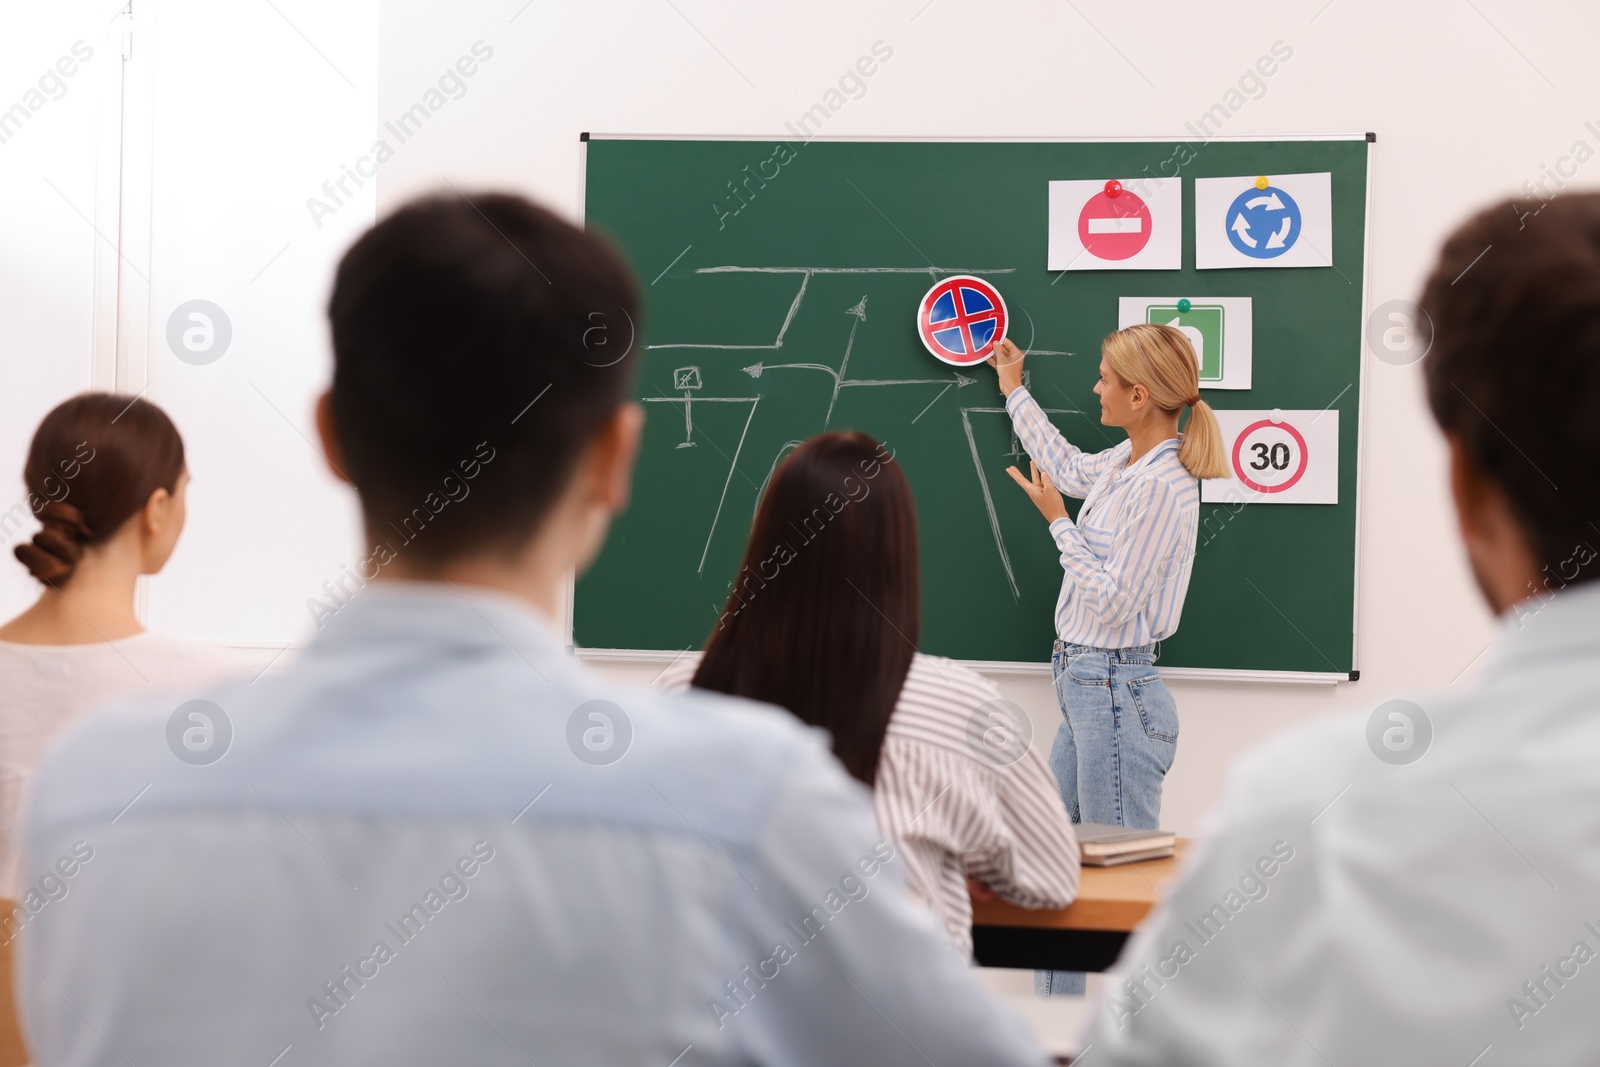 Photo of Teacher showing No Stopping road sign near chalkboard during lesson in driving school